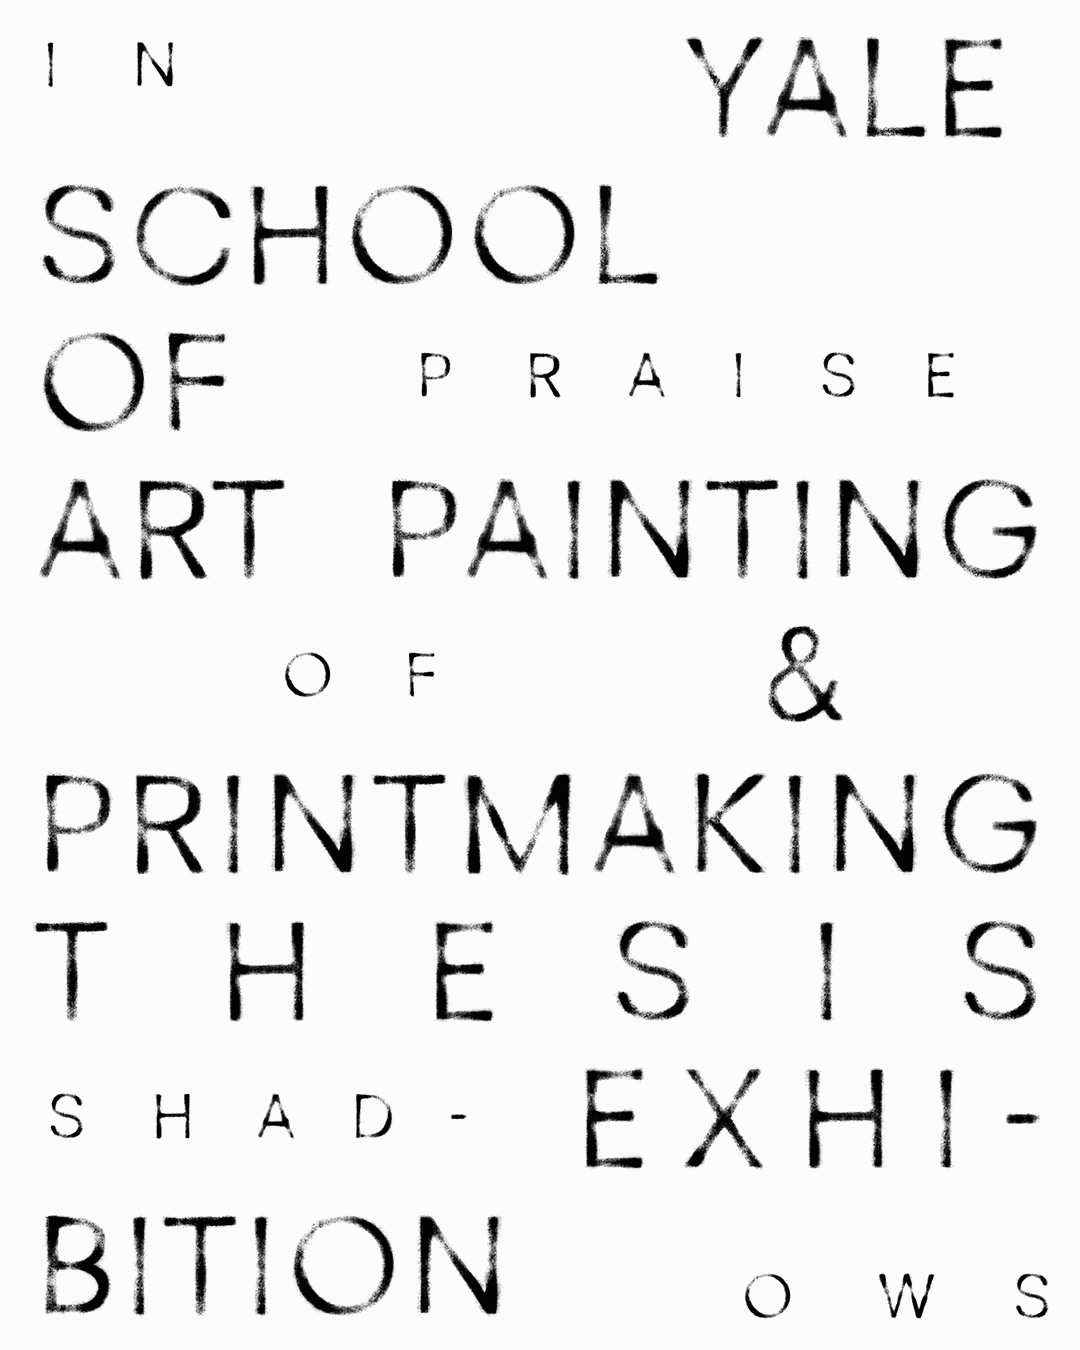 Poster for Painting/Printmaking MFA Thesis Show in Spring 2021, "In Praise of Shadows"